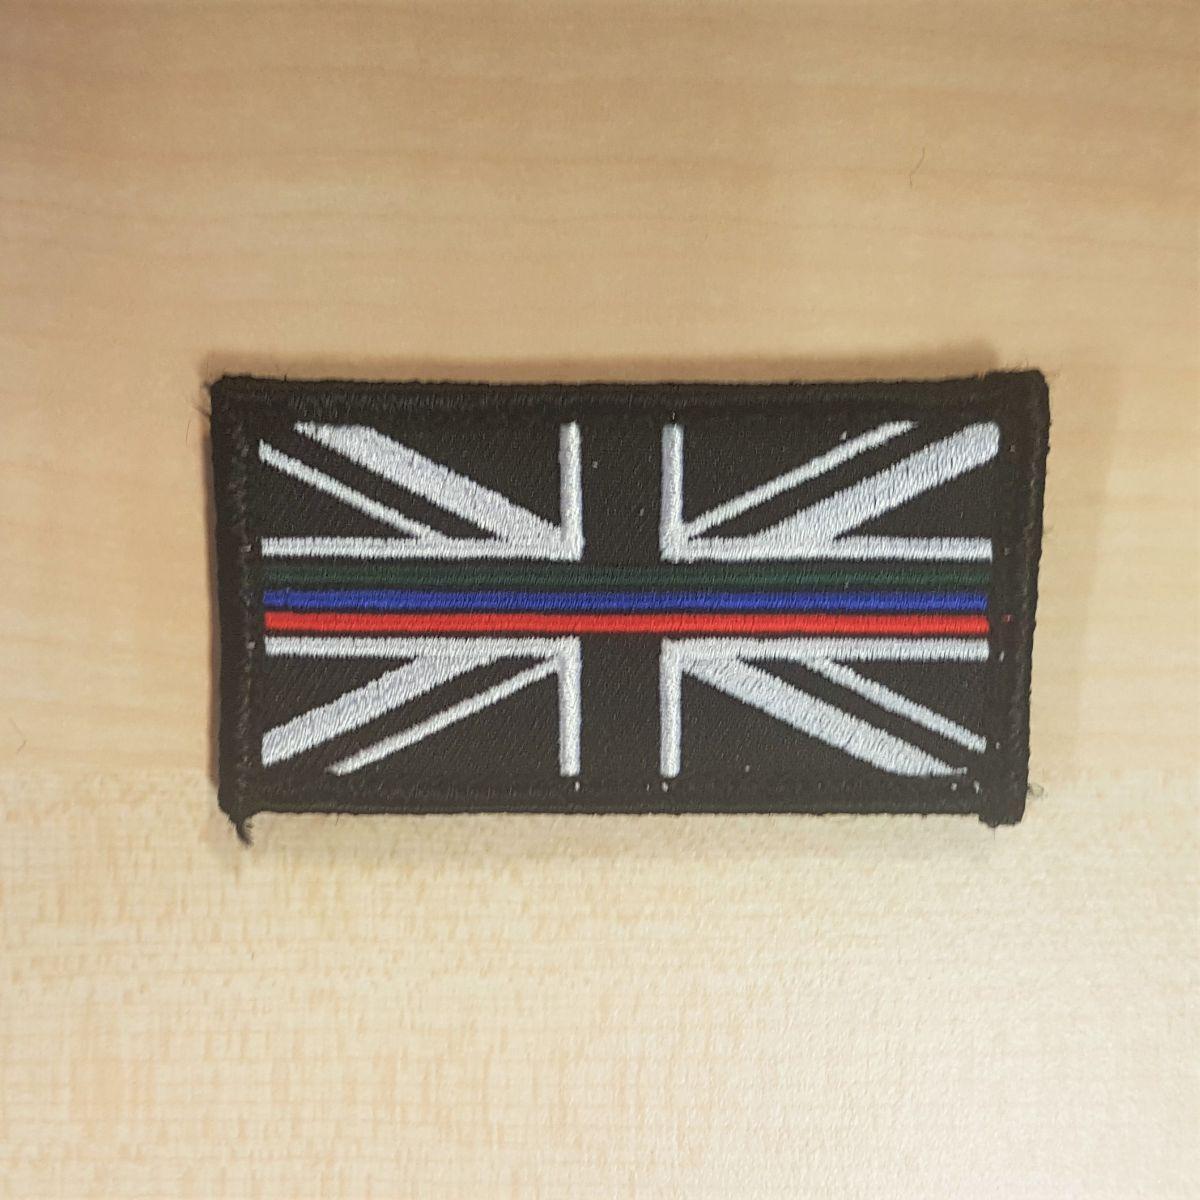 Blue and Red Line Logo - Thin Green, Blue & Red Line” Velcro Patch. UK Cop Humour